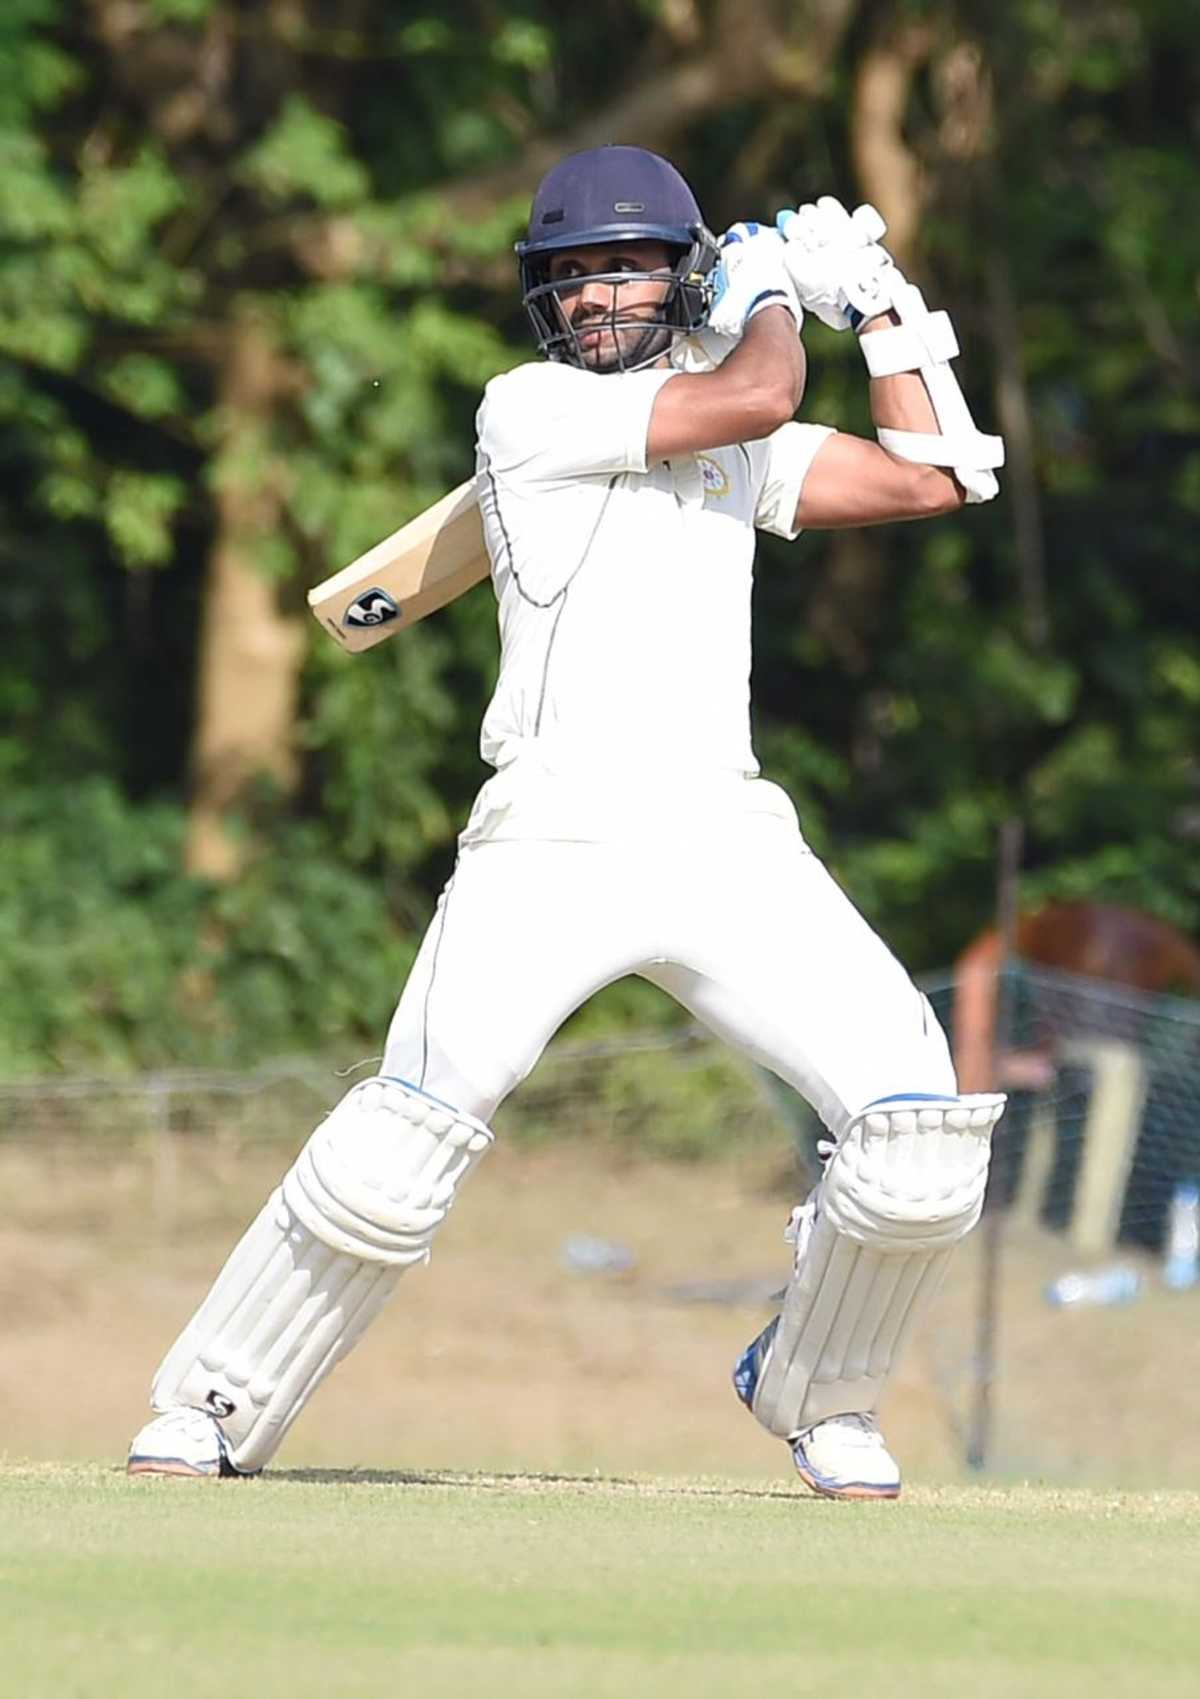 Milind Kumar plays the ball square